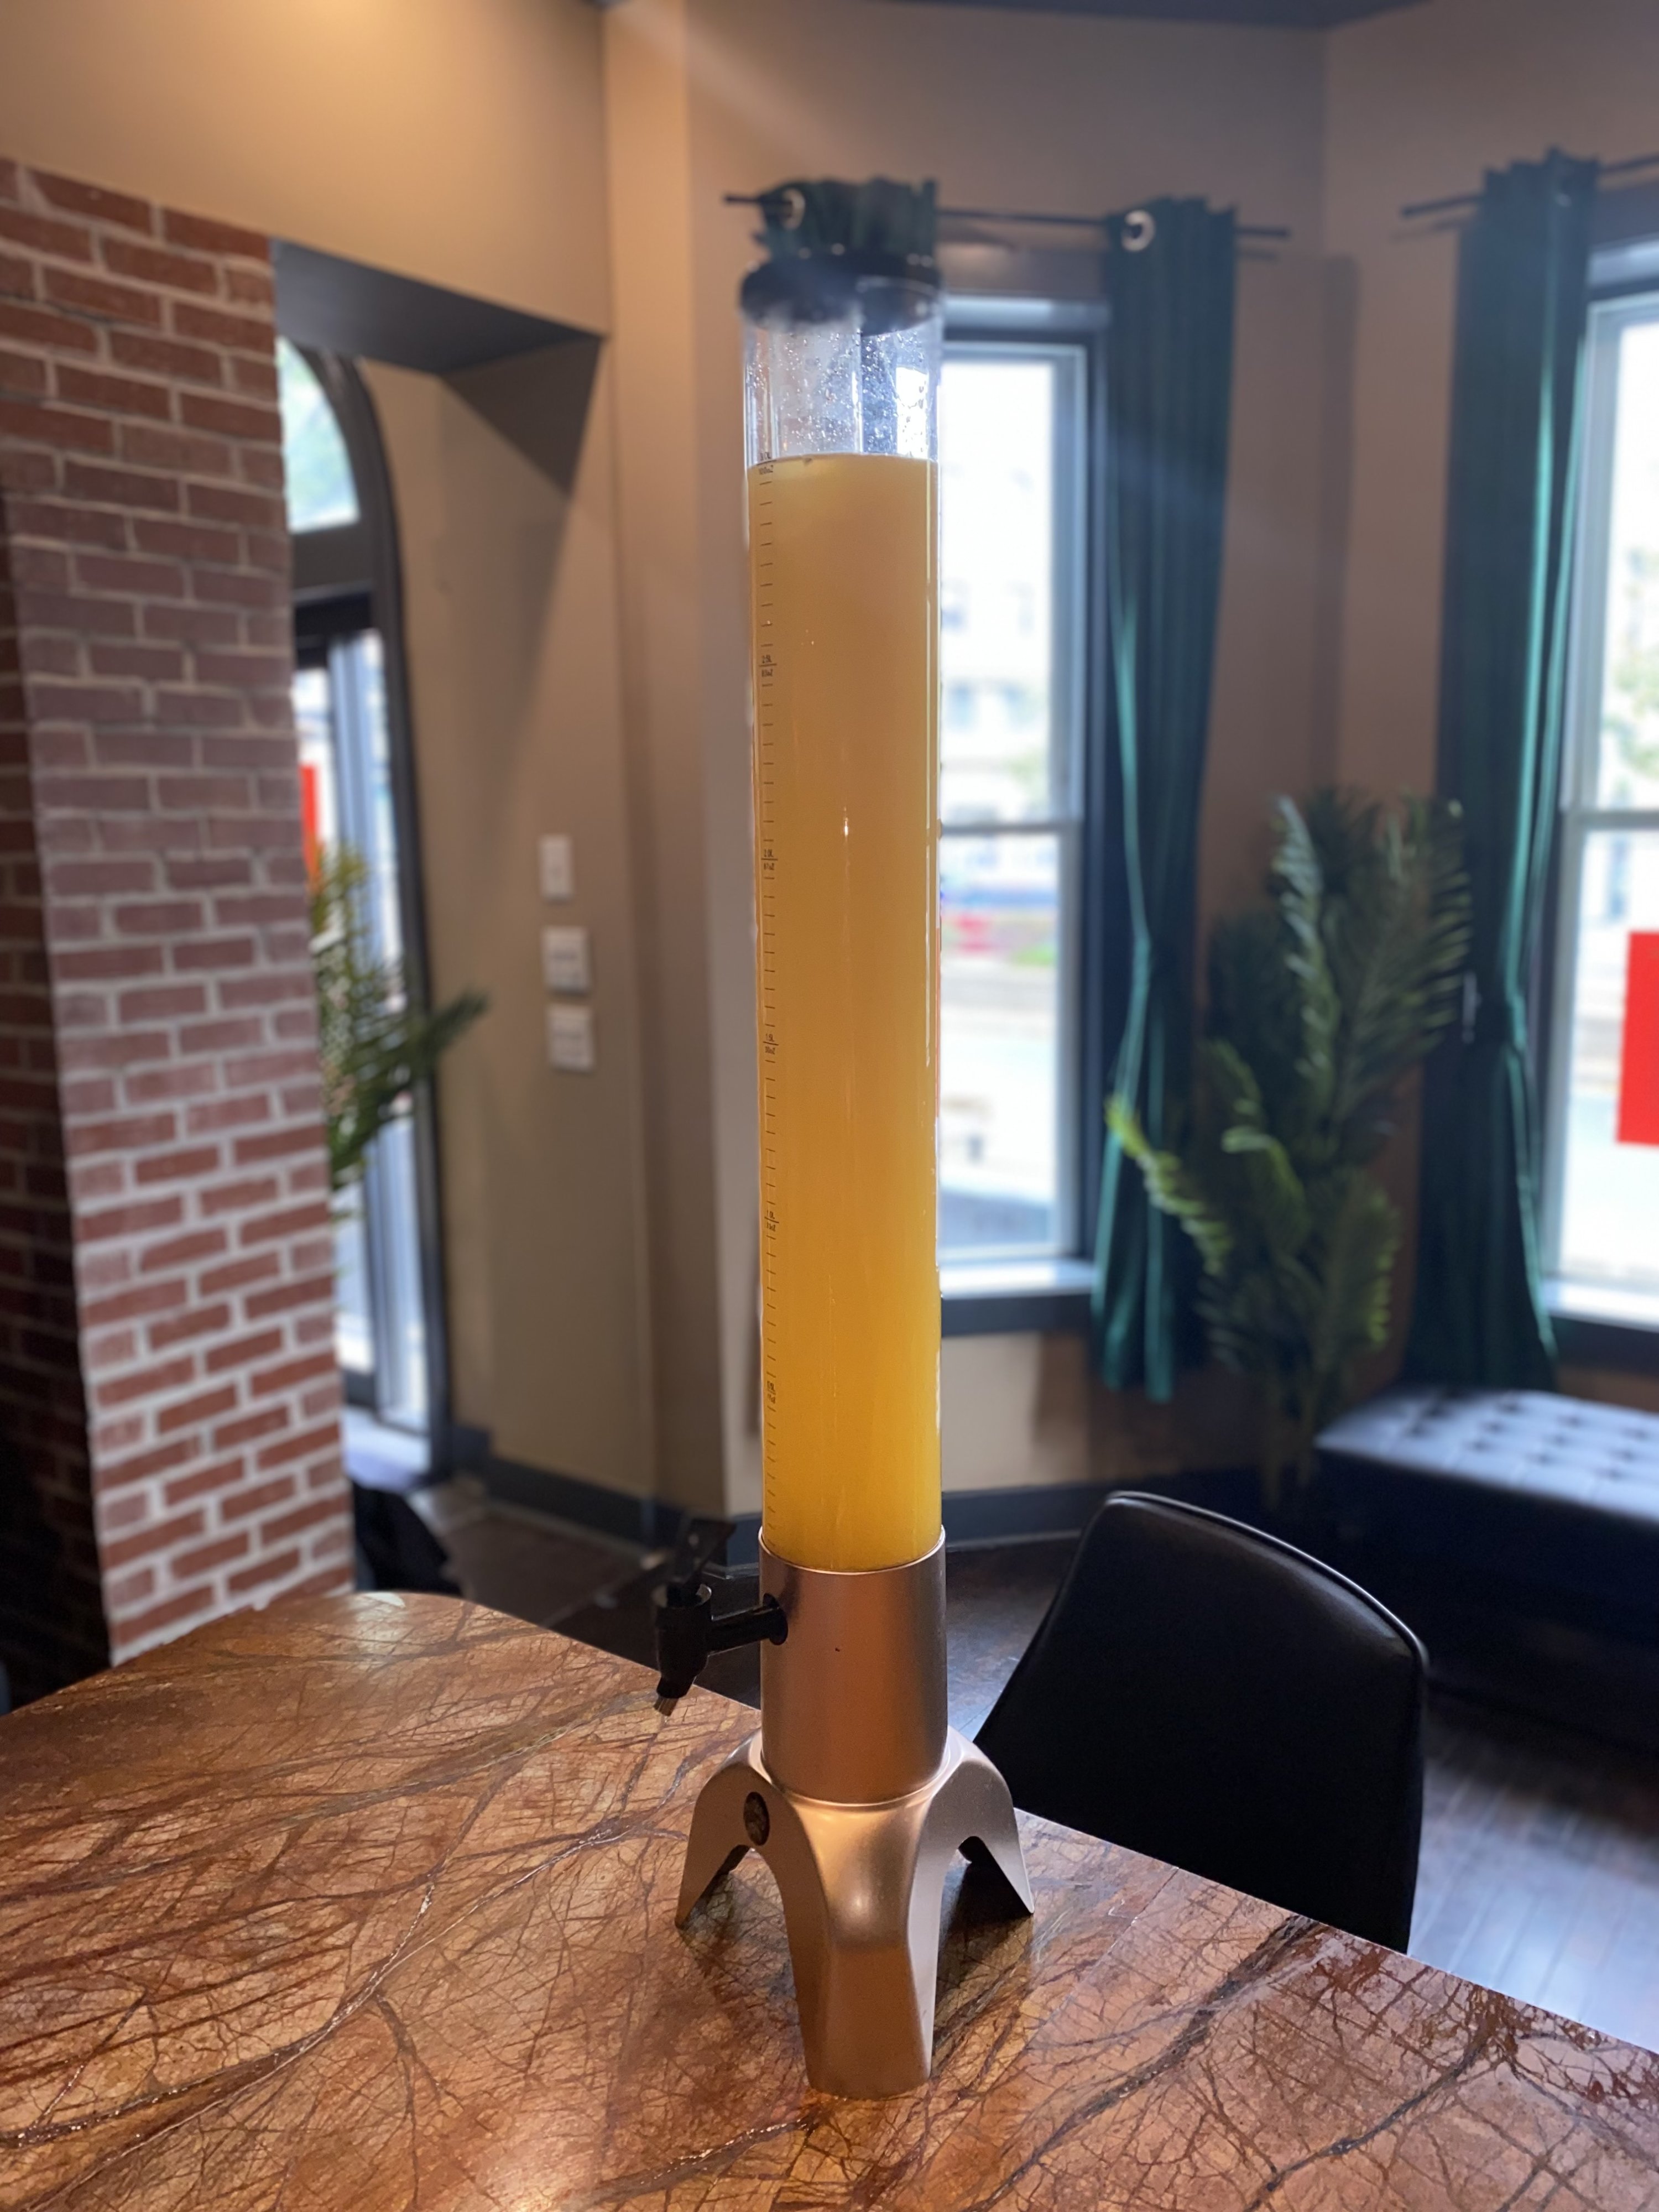 Krave Restaurant Serves Bottomless Mimosa Towers in Dupont